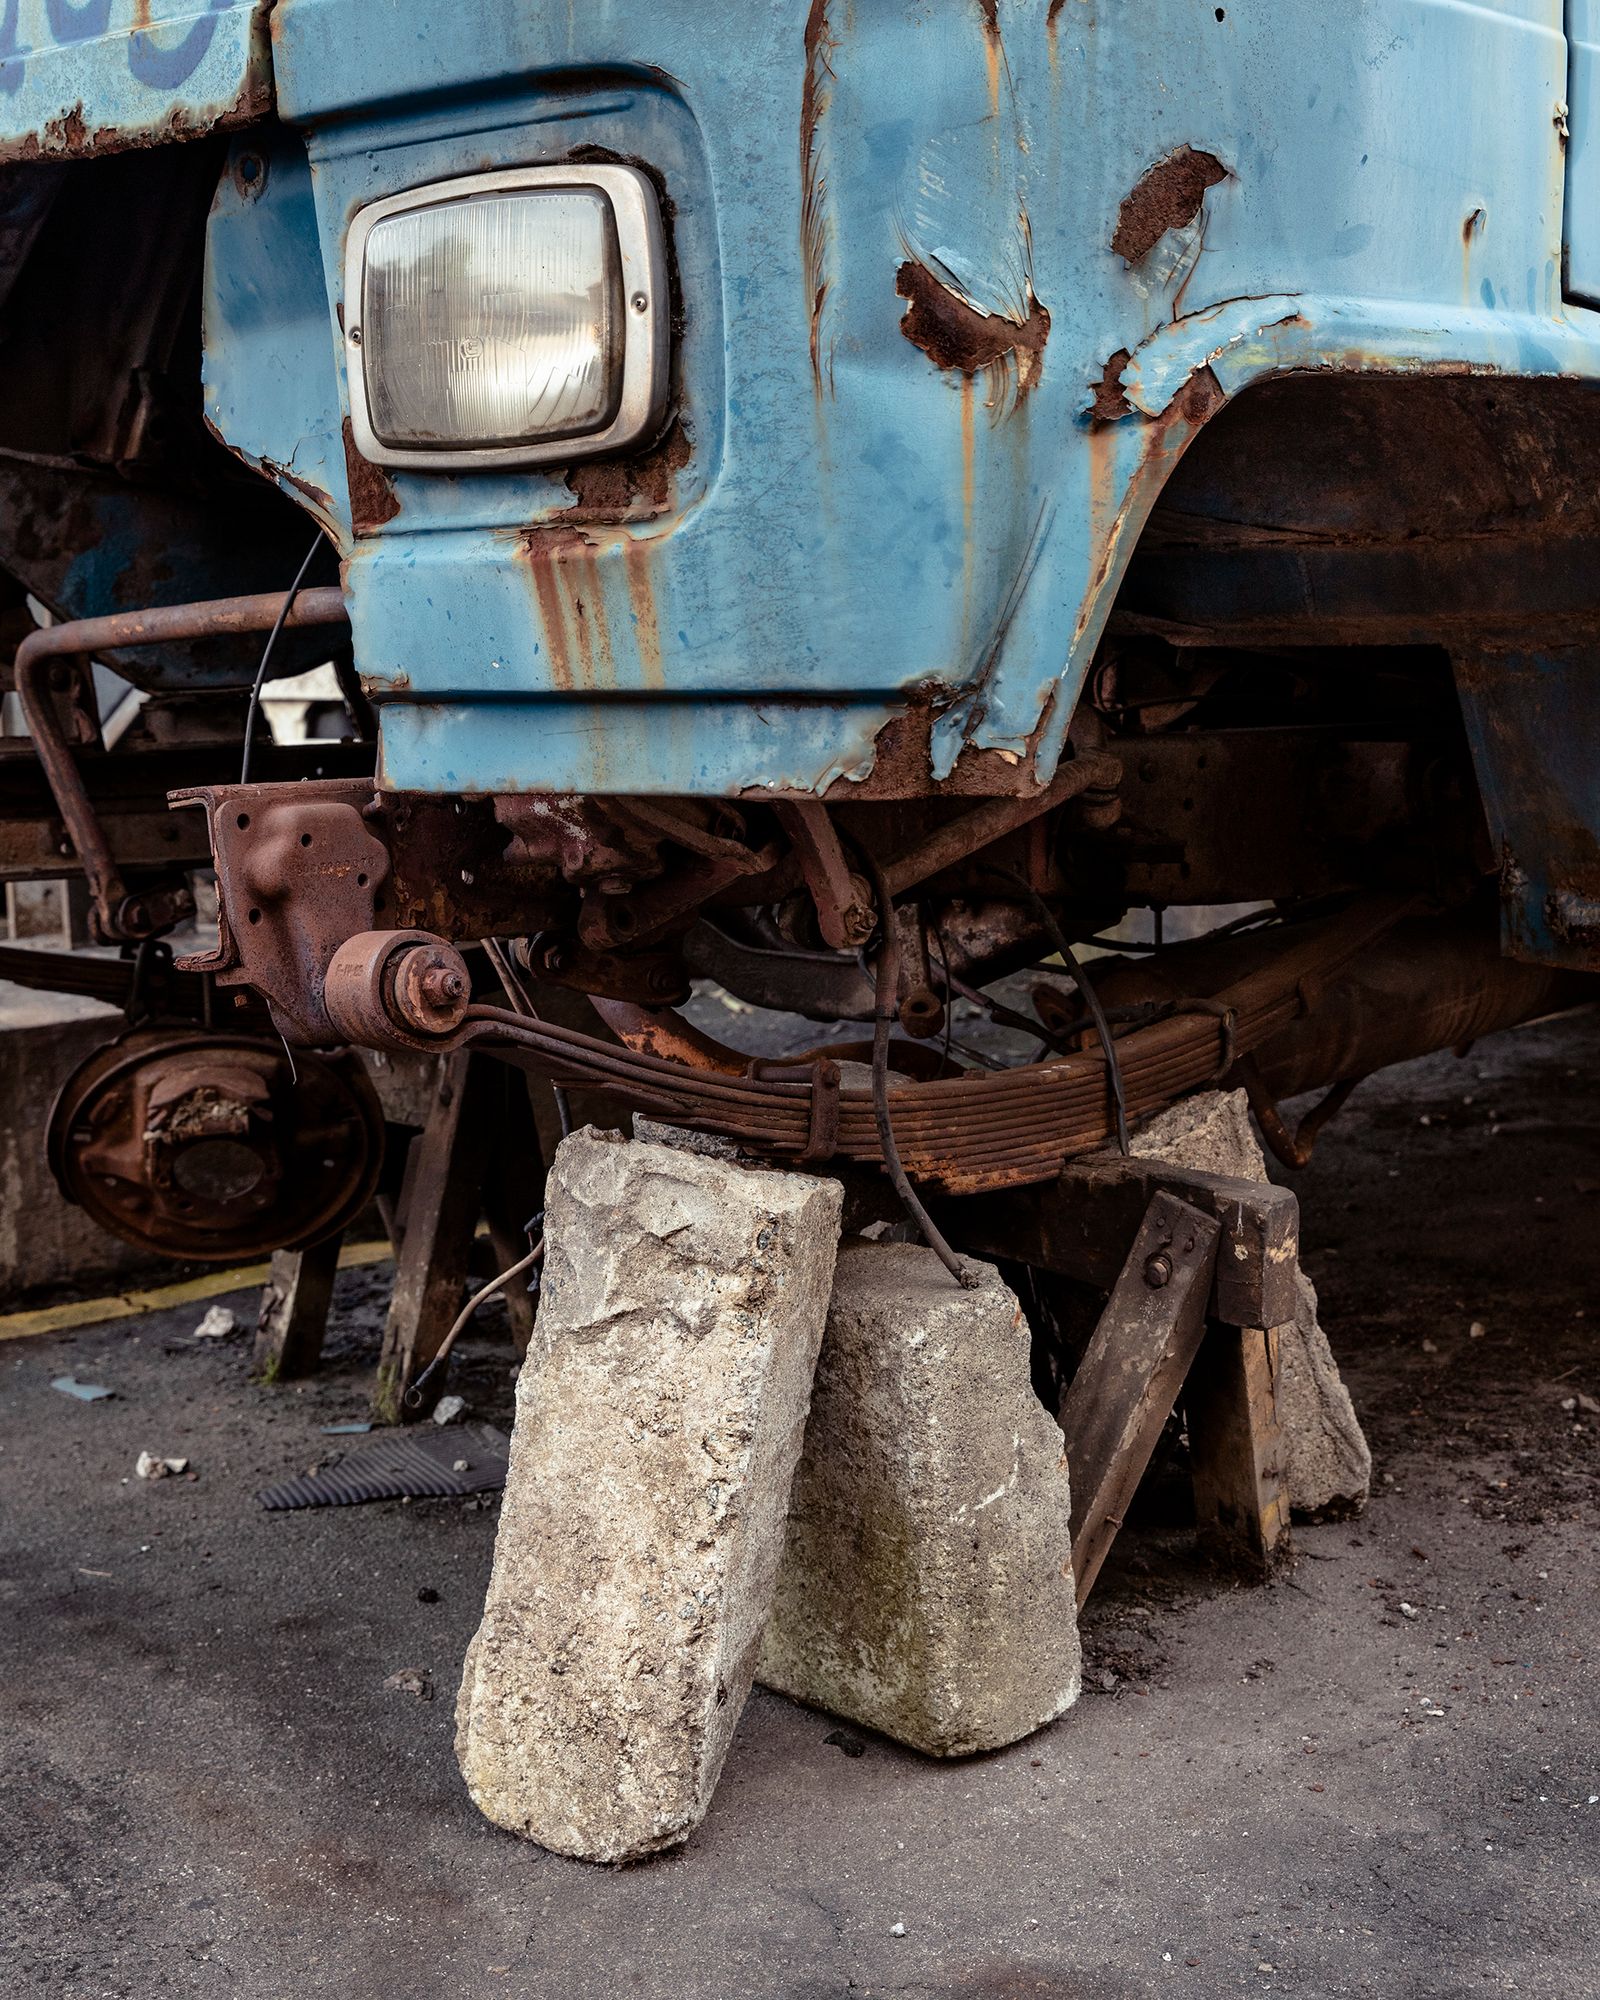 © Gui Christ - Remains of an abandoned truck with stolen wheels